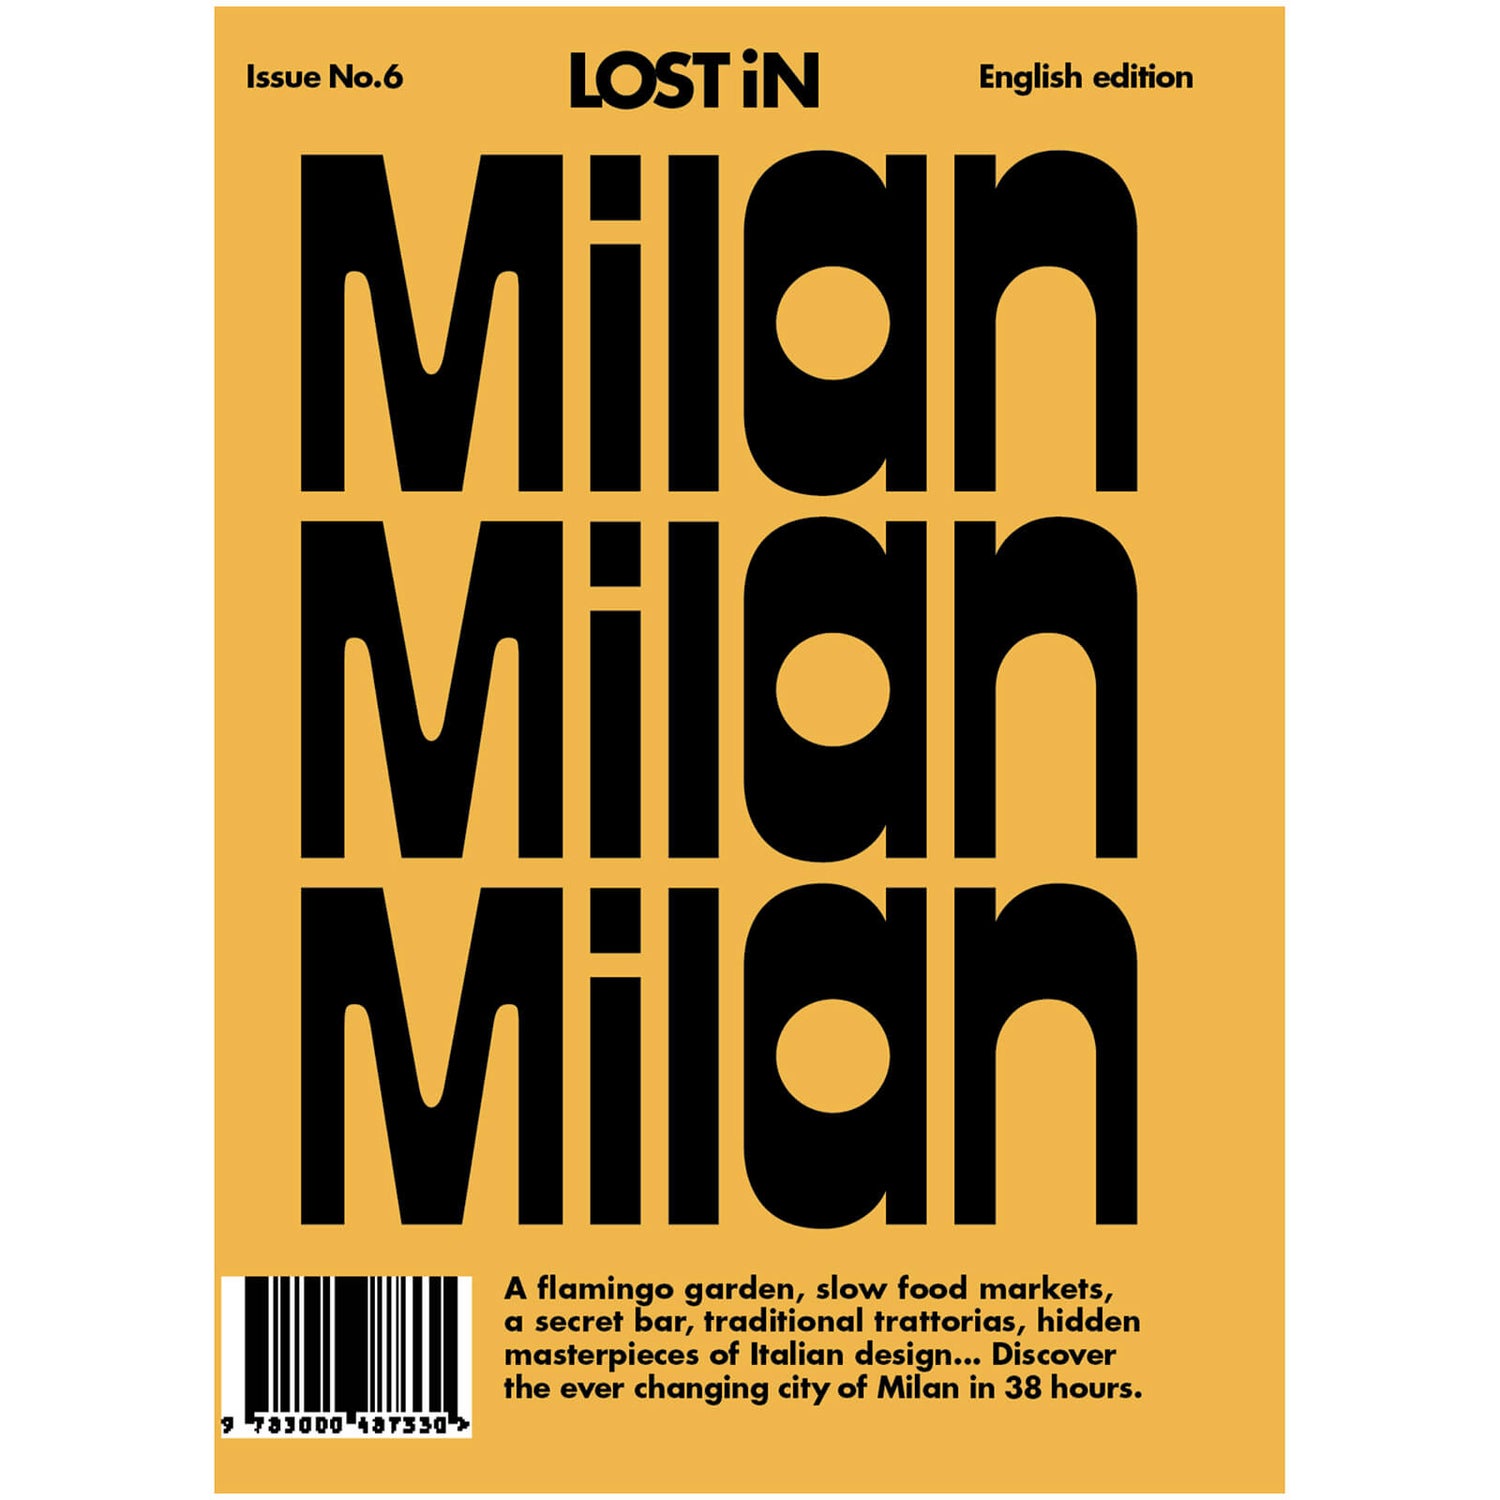 Lost In: Milan